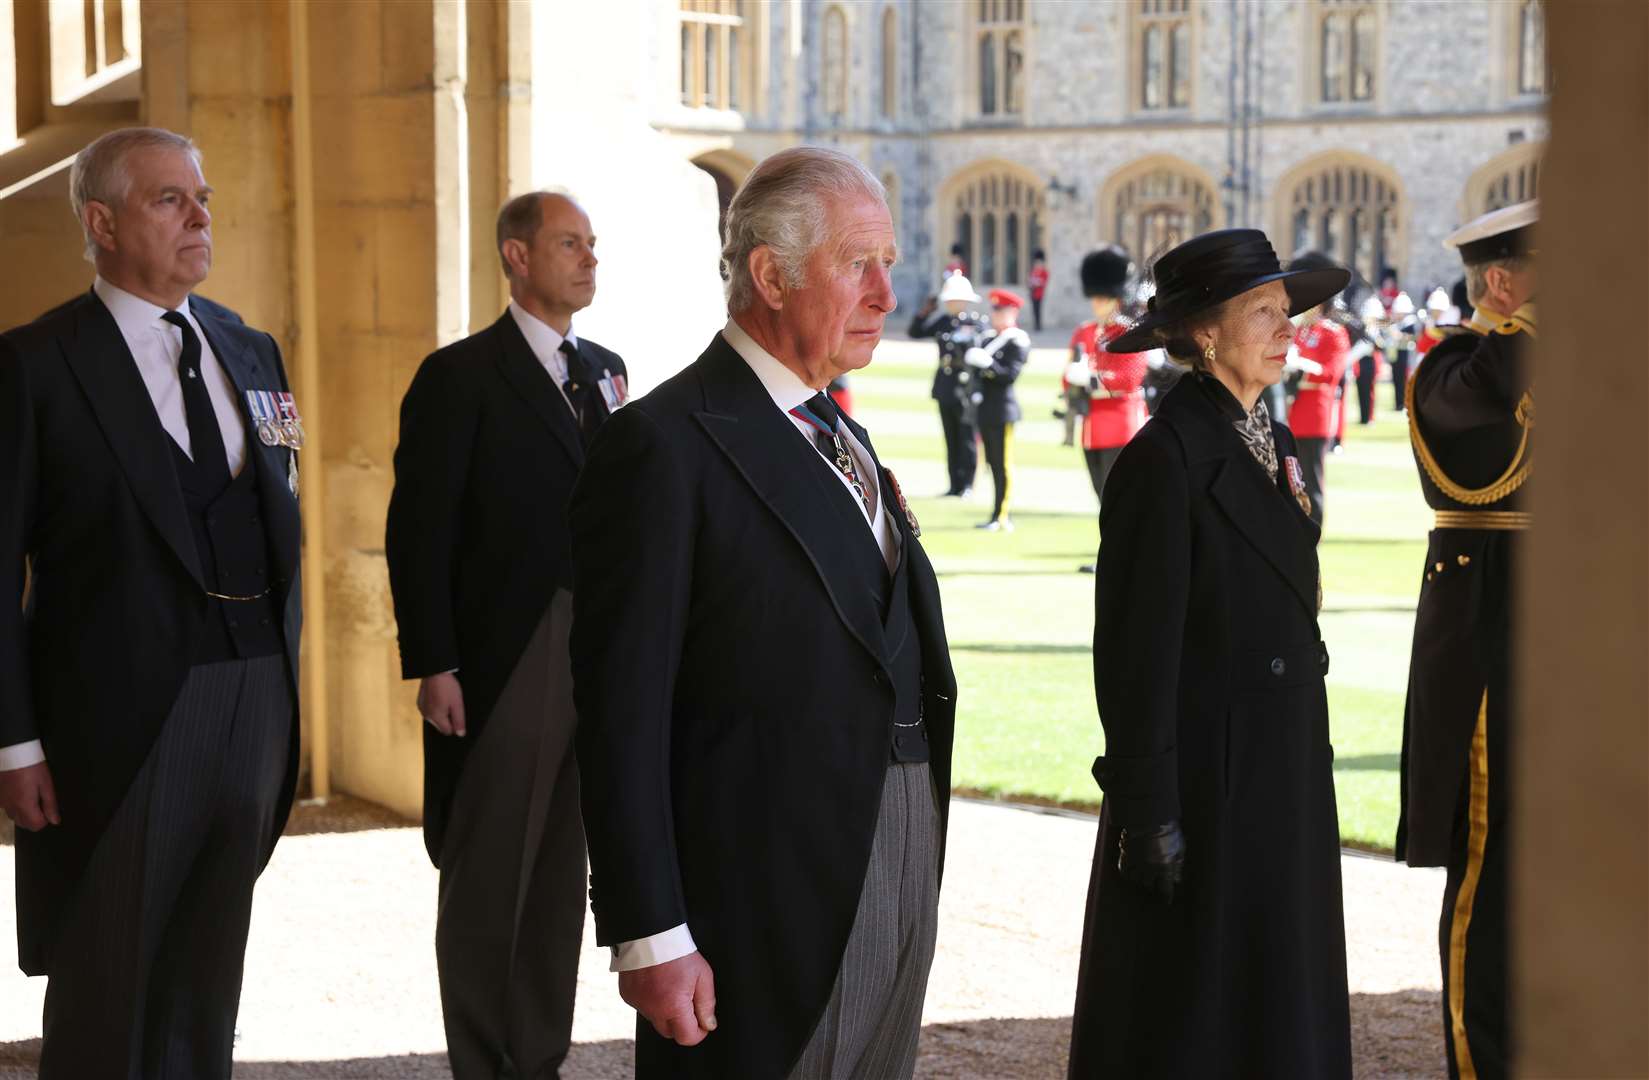 The Duke of York, the Earl of Wessex, the Prince of Wales and the Princess Royal (Chris Jackson/PA)